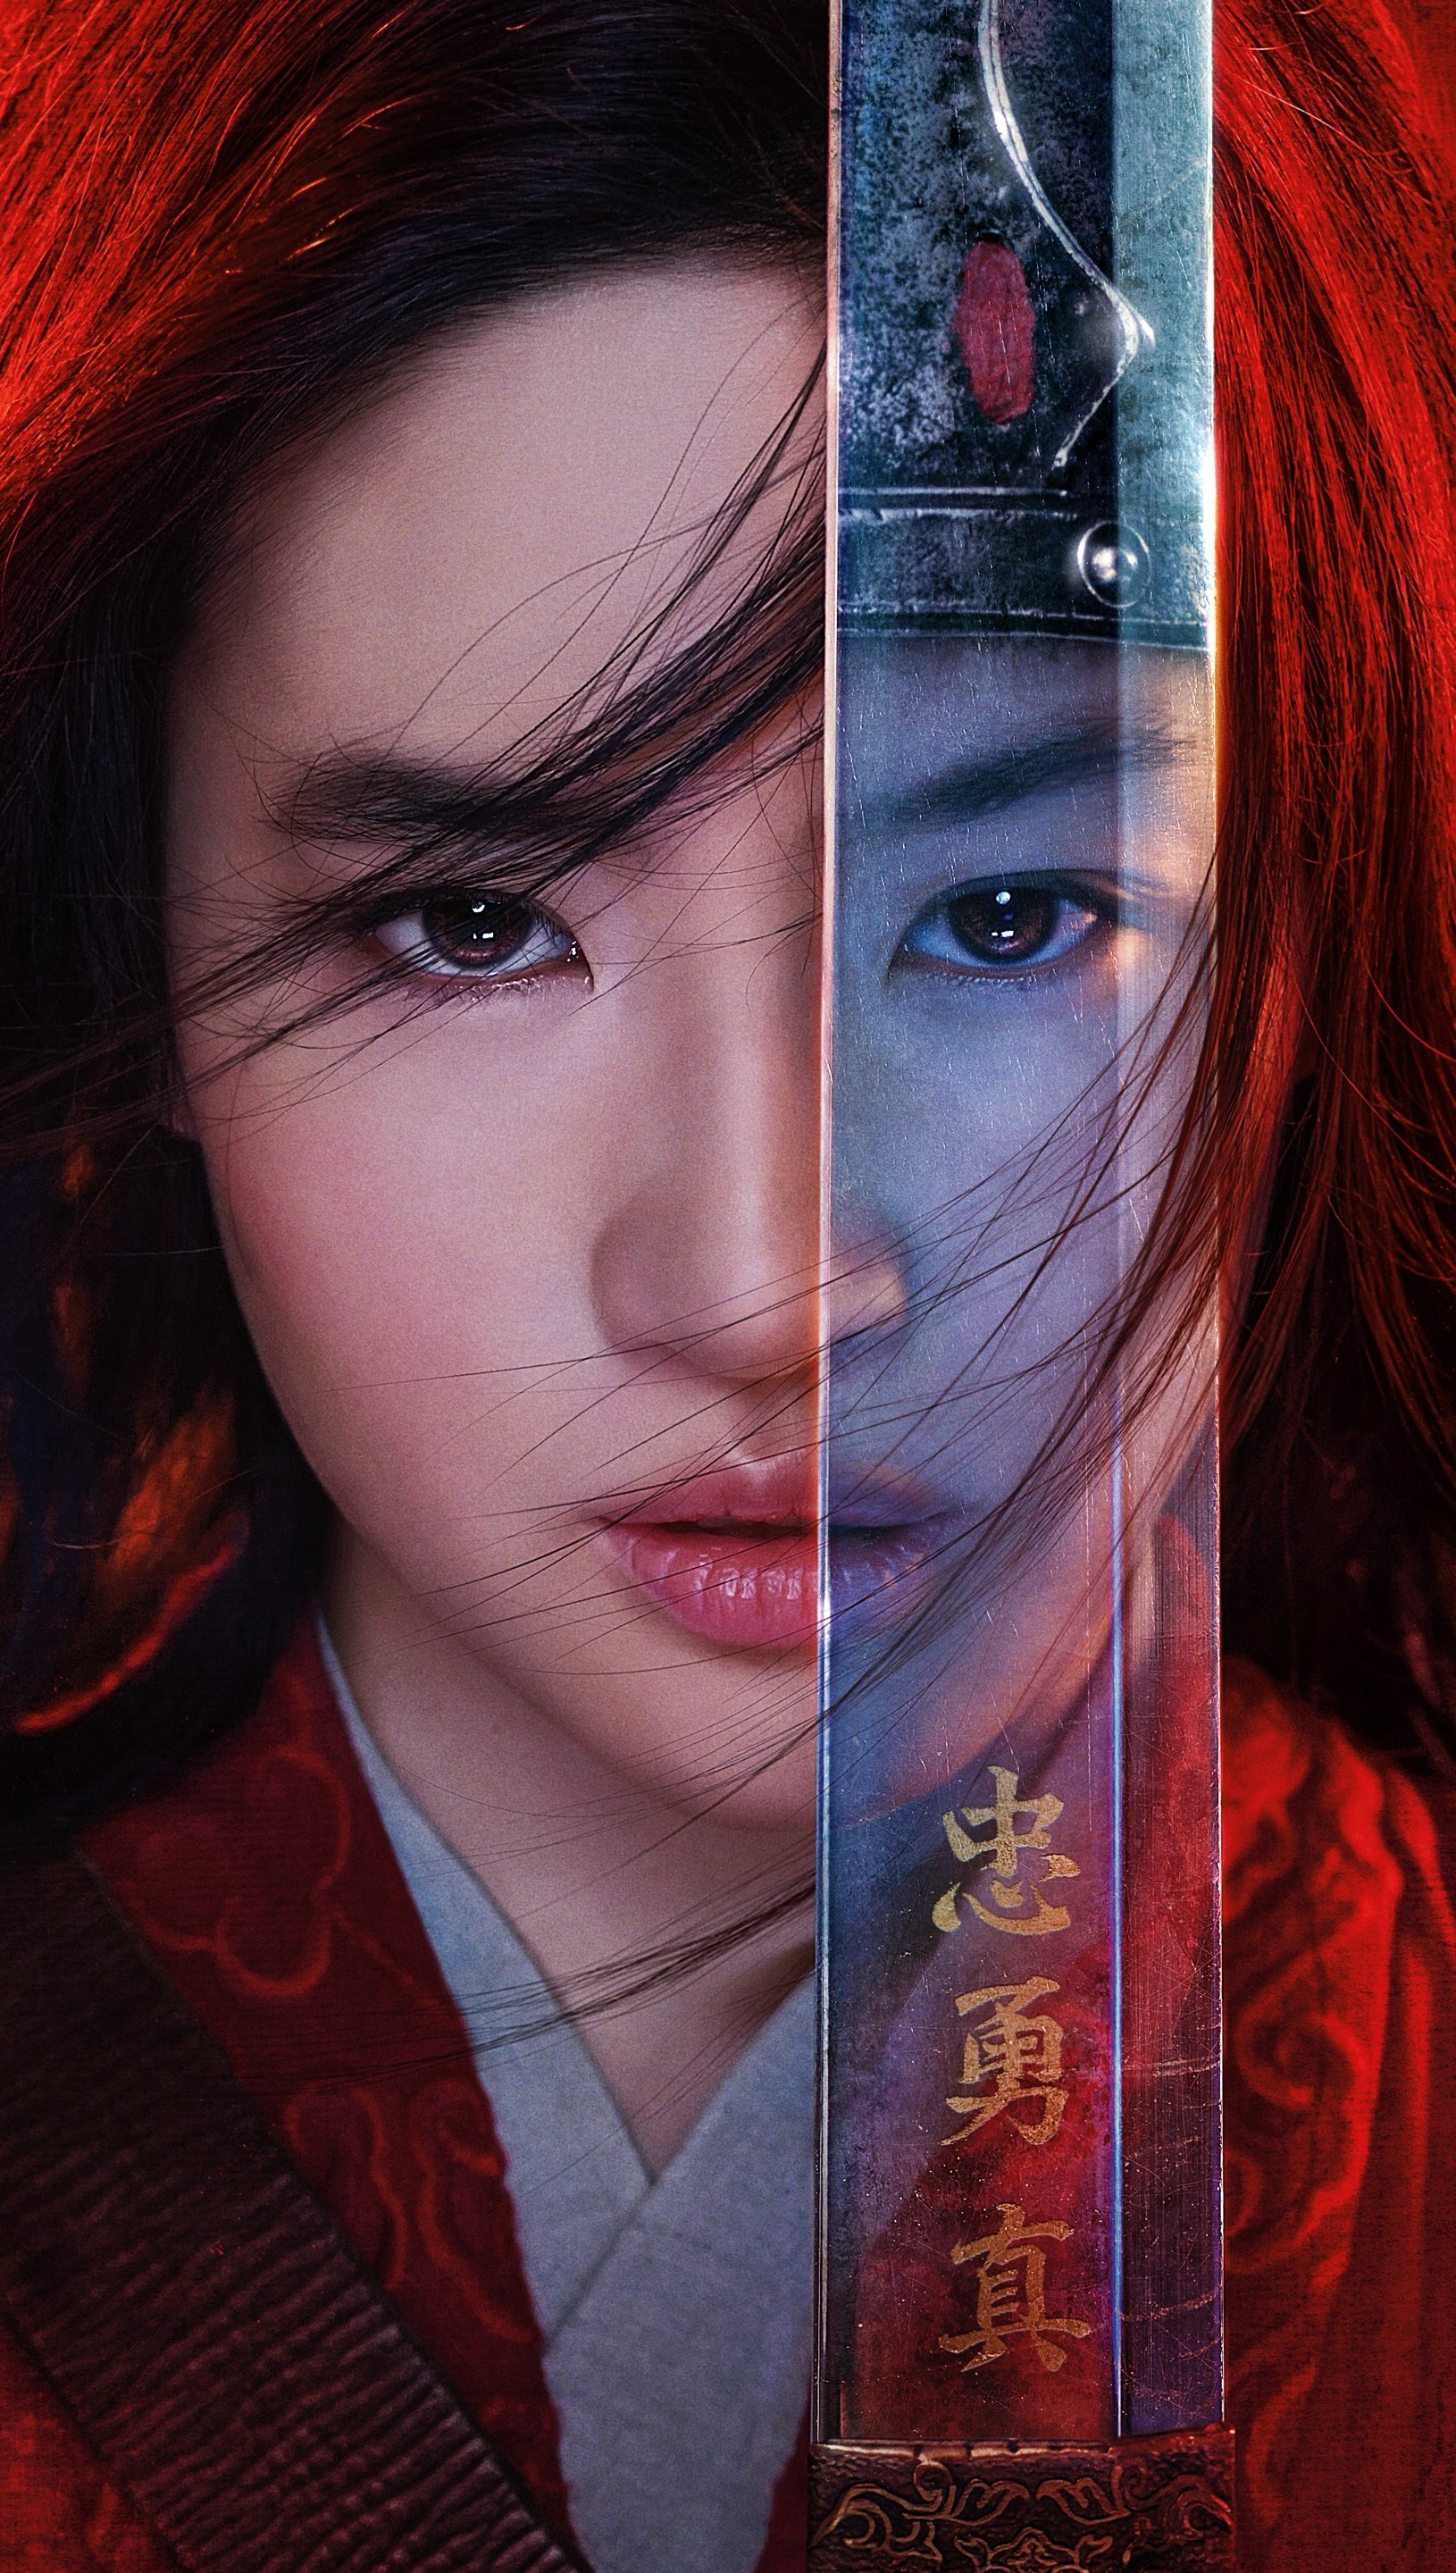 Poster for the live action Mulan movie - Mulan